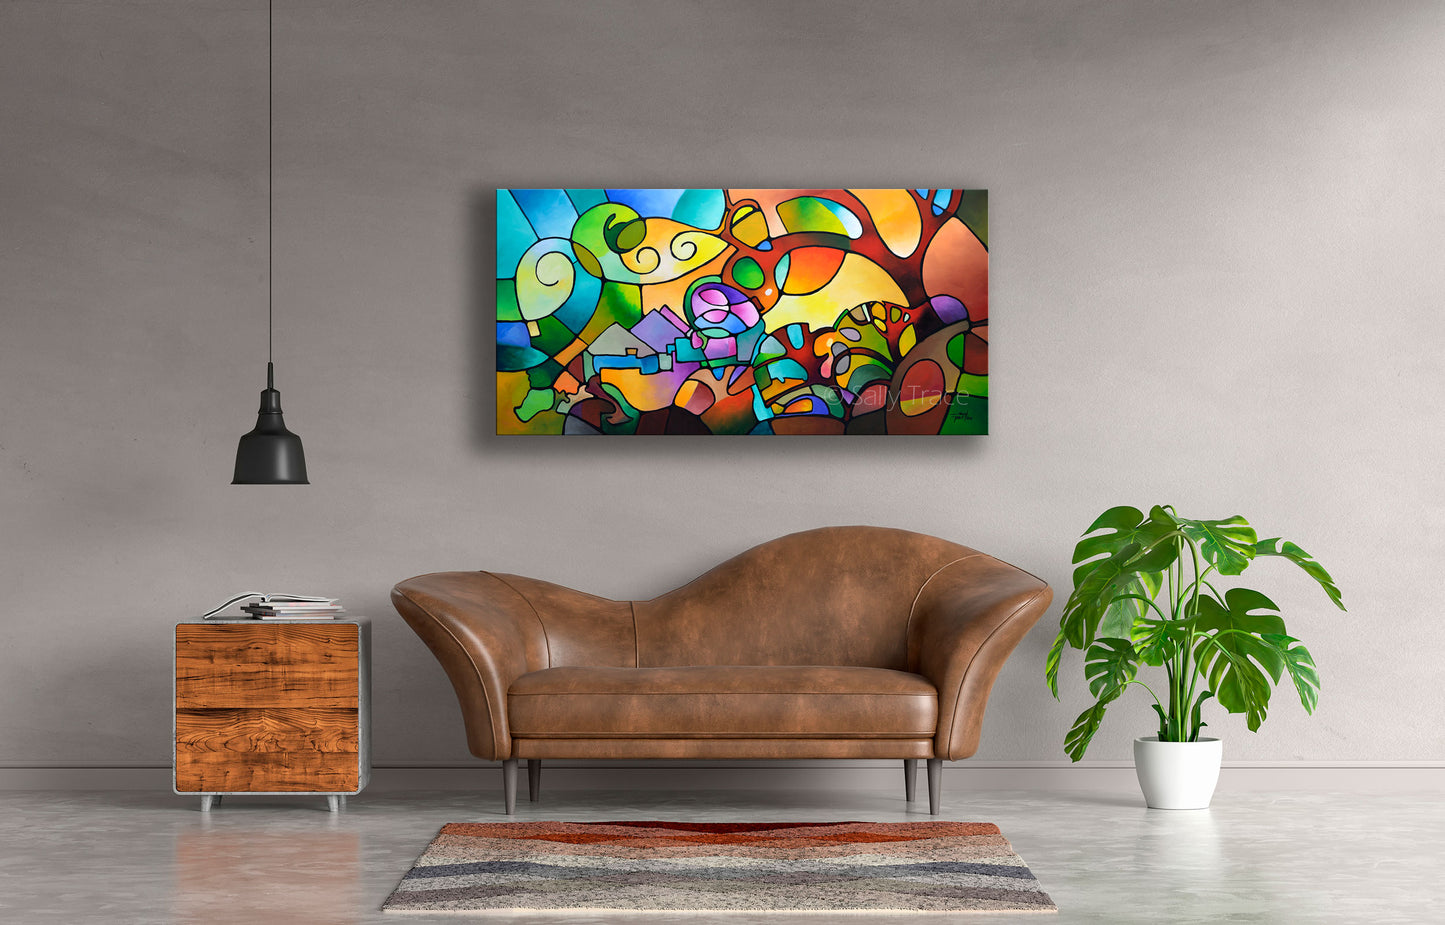 Original abstract landscape painting by Sally Trace that is about a feeling of expansiveness when one is stepping out into a new day. This is an acrylic on canvas painting in a vertical format and is 24 inches high and 48 inches wide.  This image shows the painting in a living room setting.